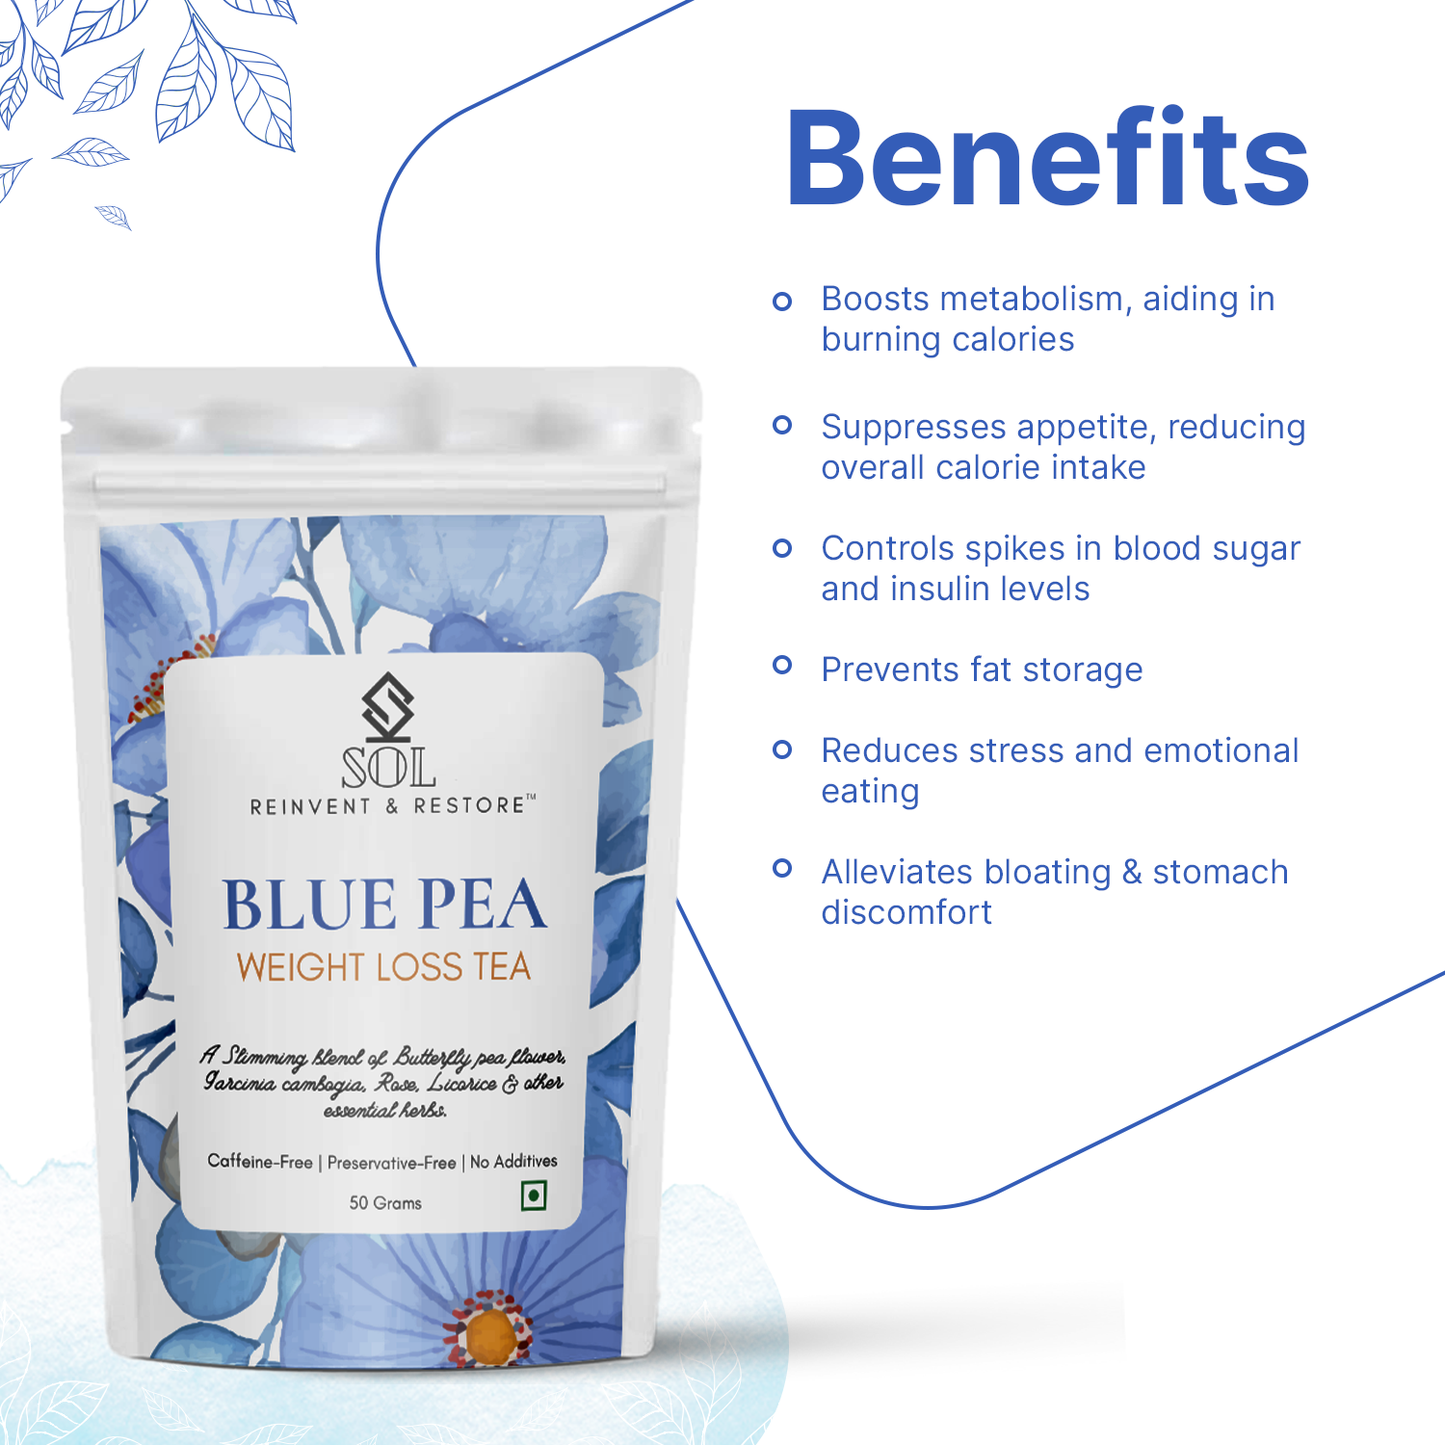 BLUE PEA TEA FOR WEIGHT LOSS